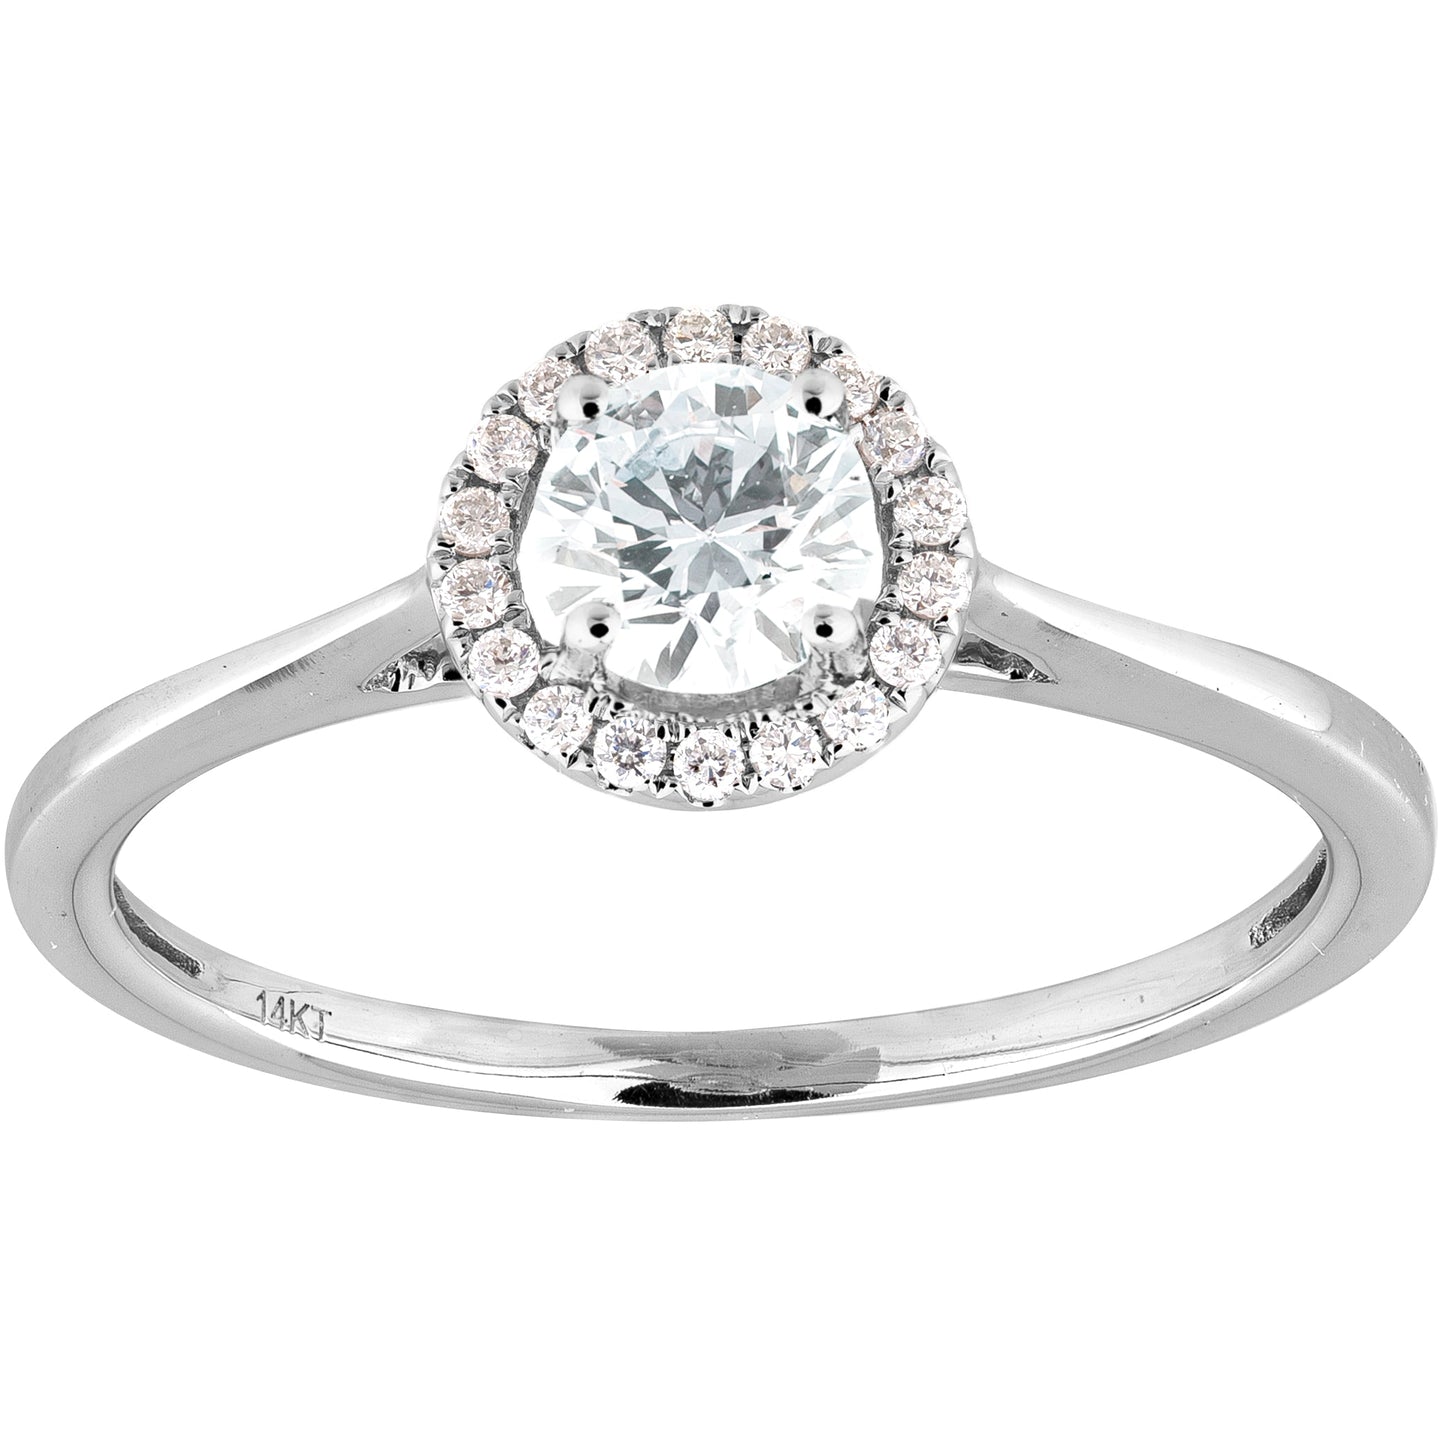 0.34ct Diamond Halo Ring in 14ct White Gold